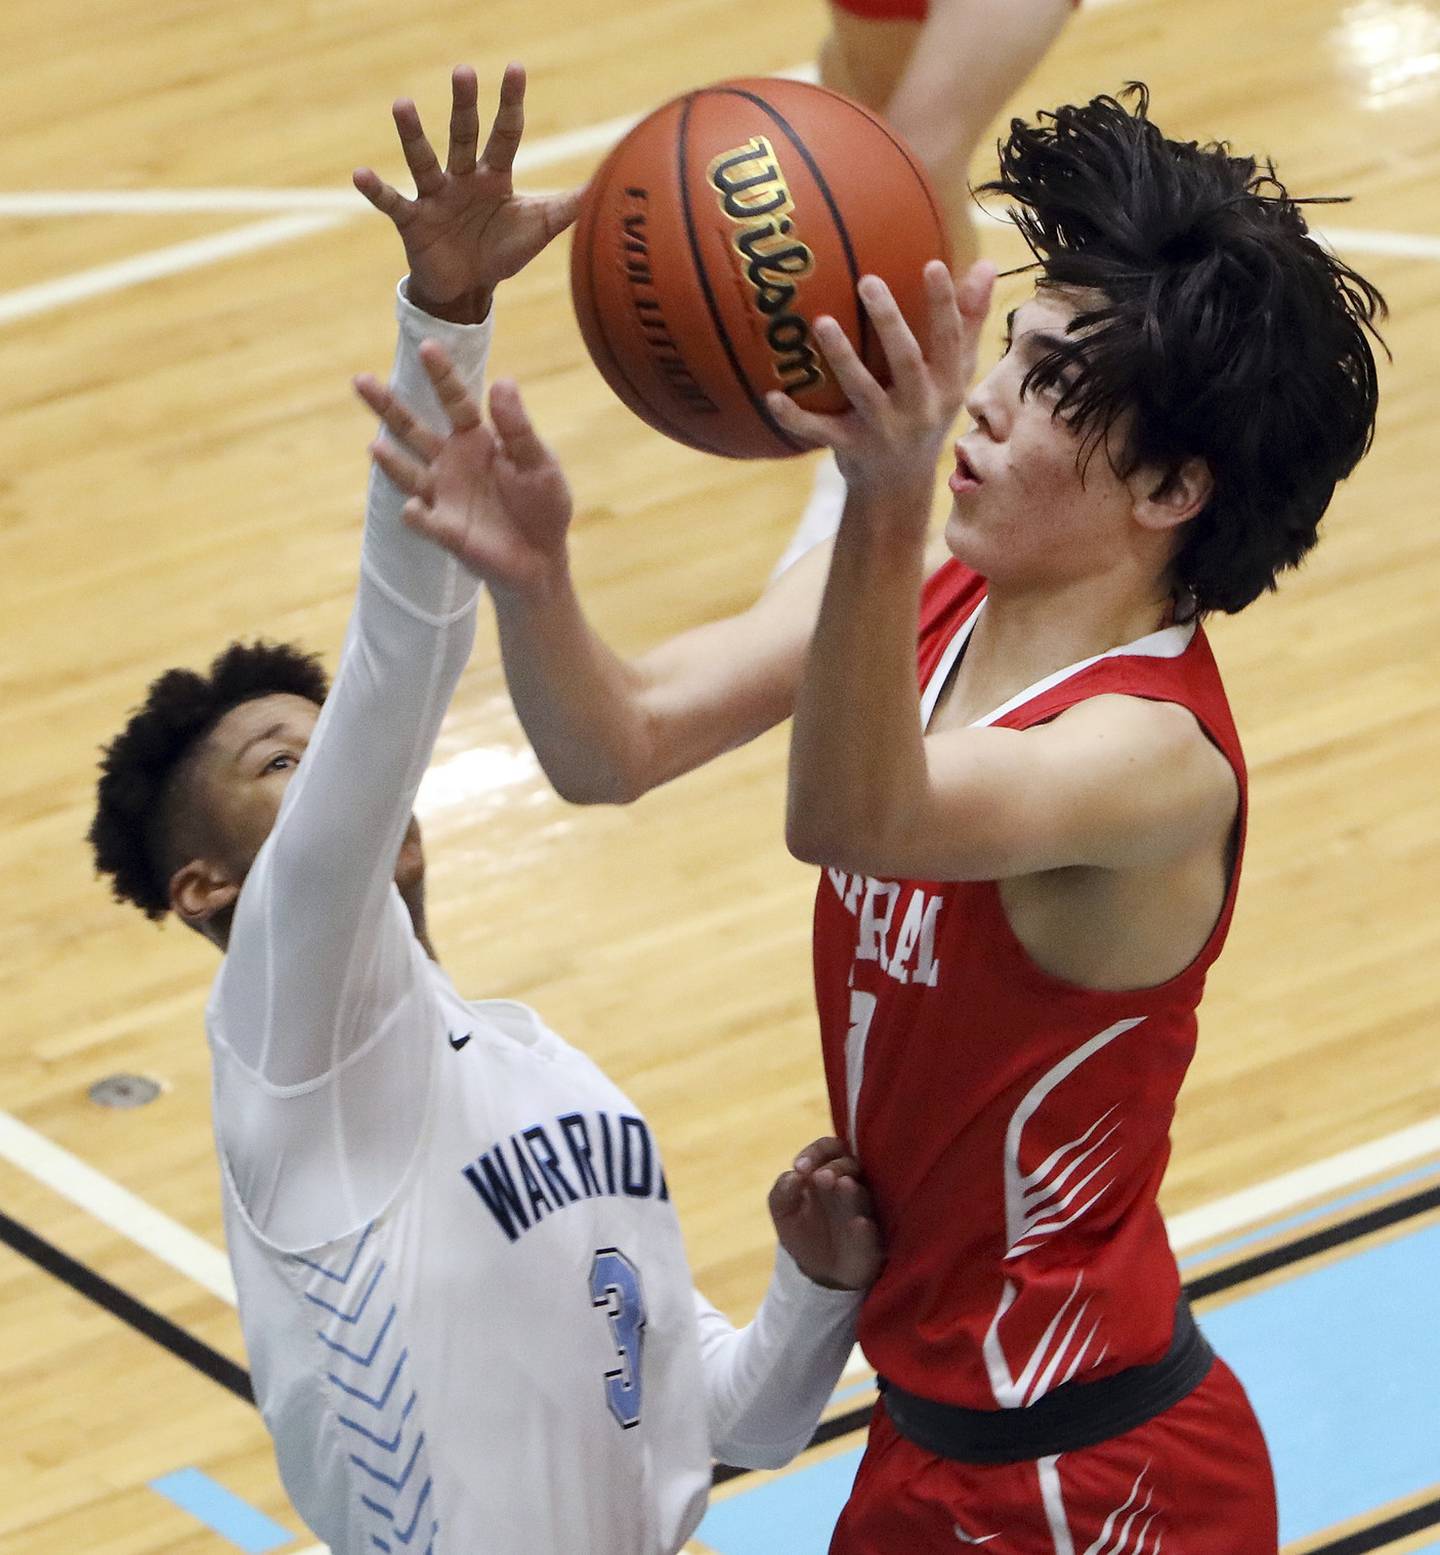 Naperville Central’s Grady Cooperkawa, right, puts up a shot against Willowbrook’s Tyler Royal during a game in Villa Park on Wednesday, Dec. 7, 2022. 